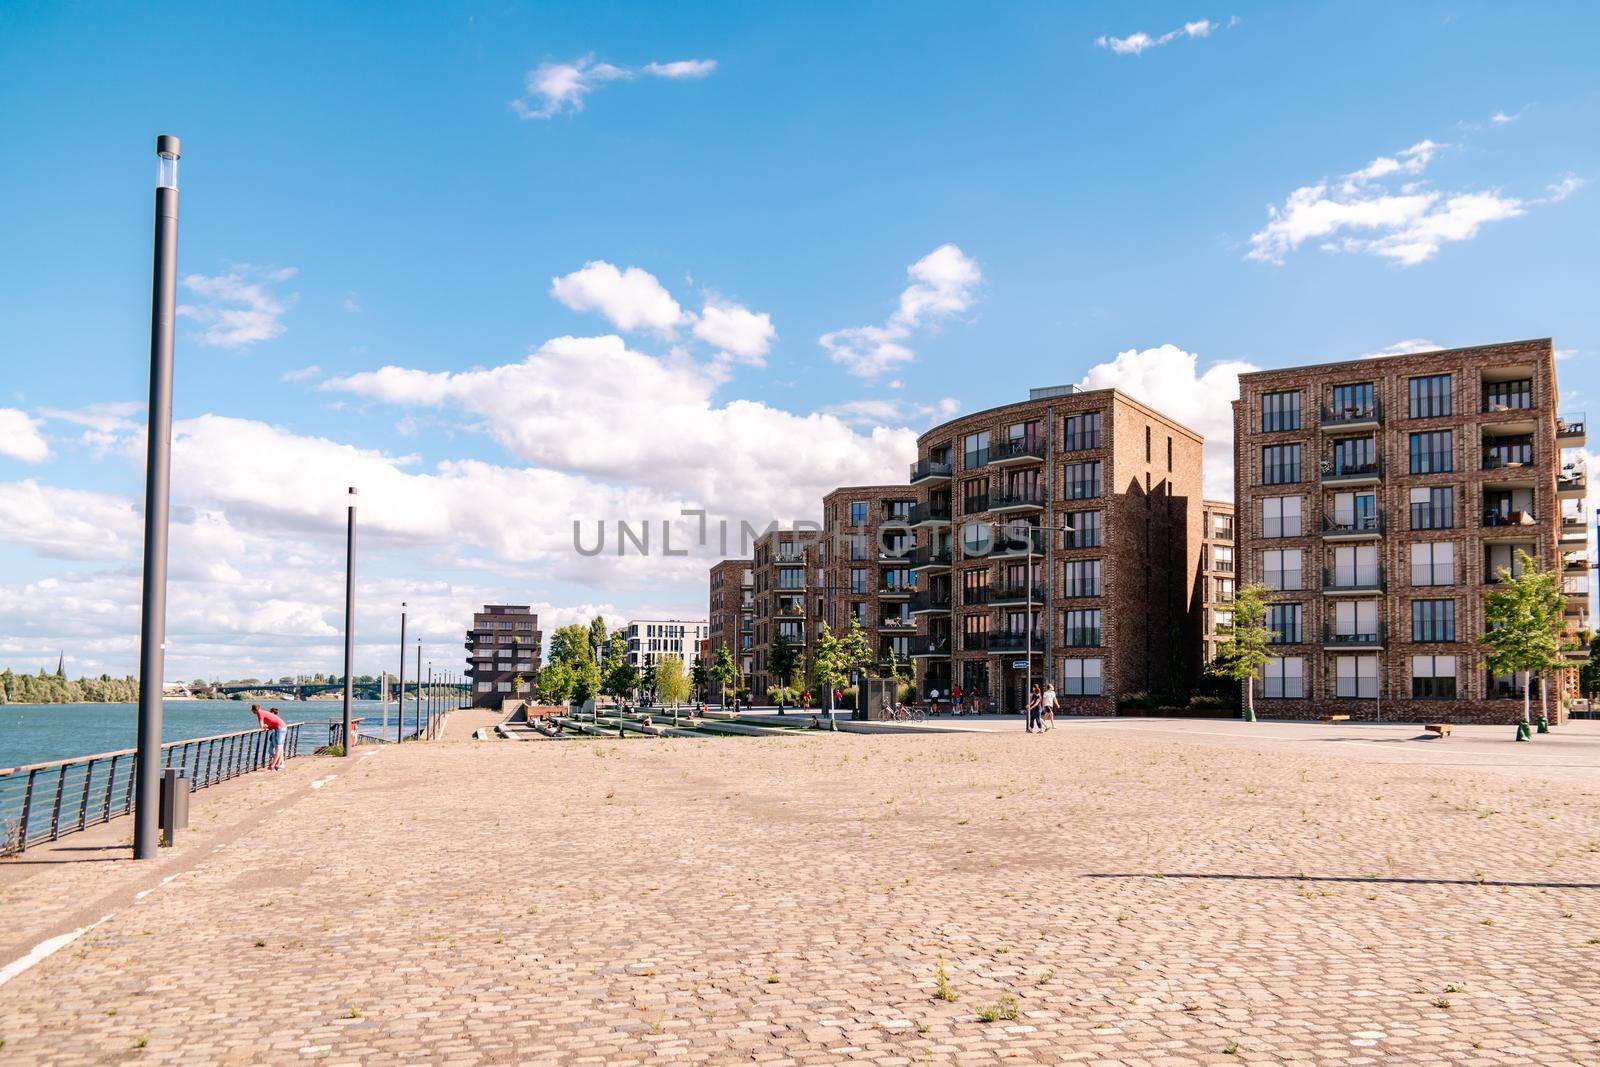 Mainz, Rheinland-PfalzGermany August 2020 , New just built structures apartment condo at port on river Rhein in Mainz by the rhine river by fokkebok